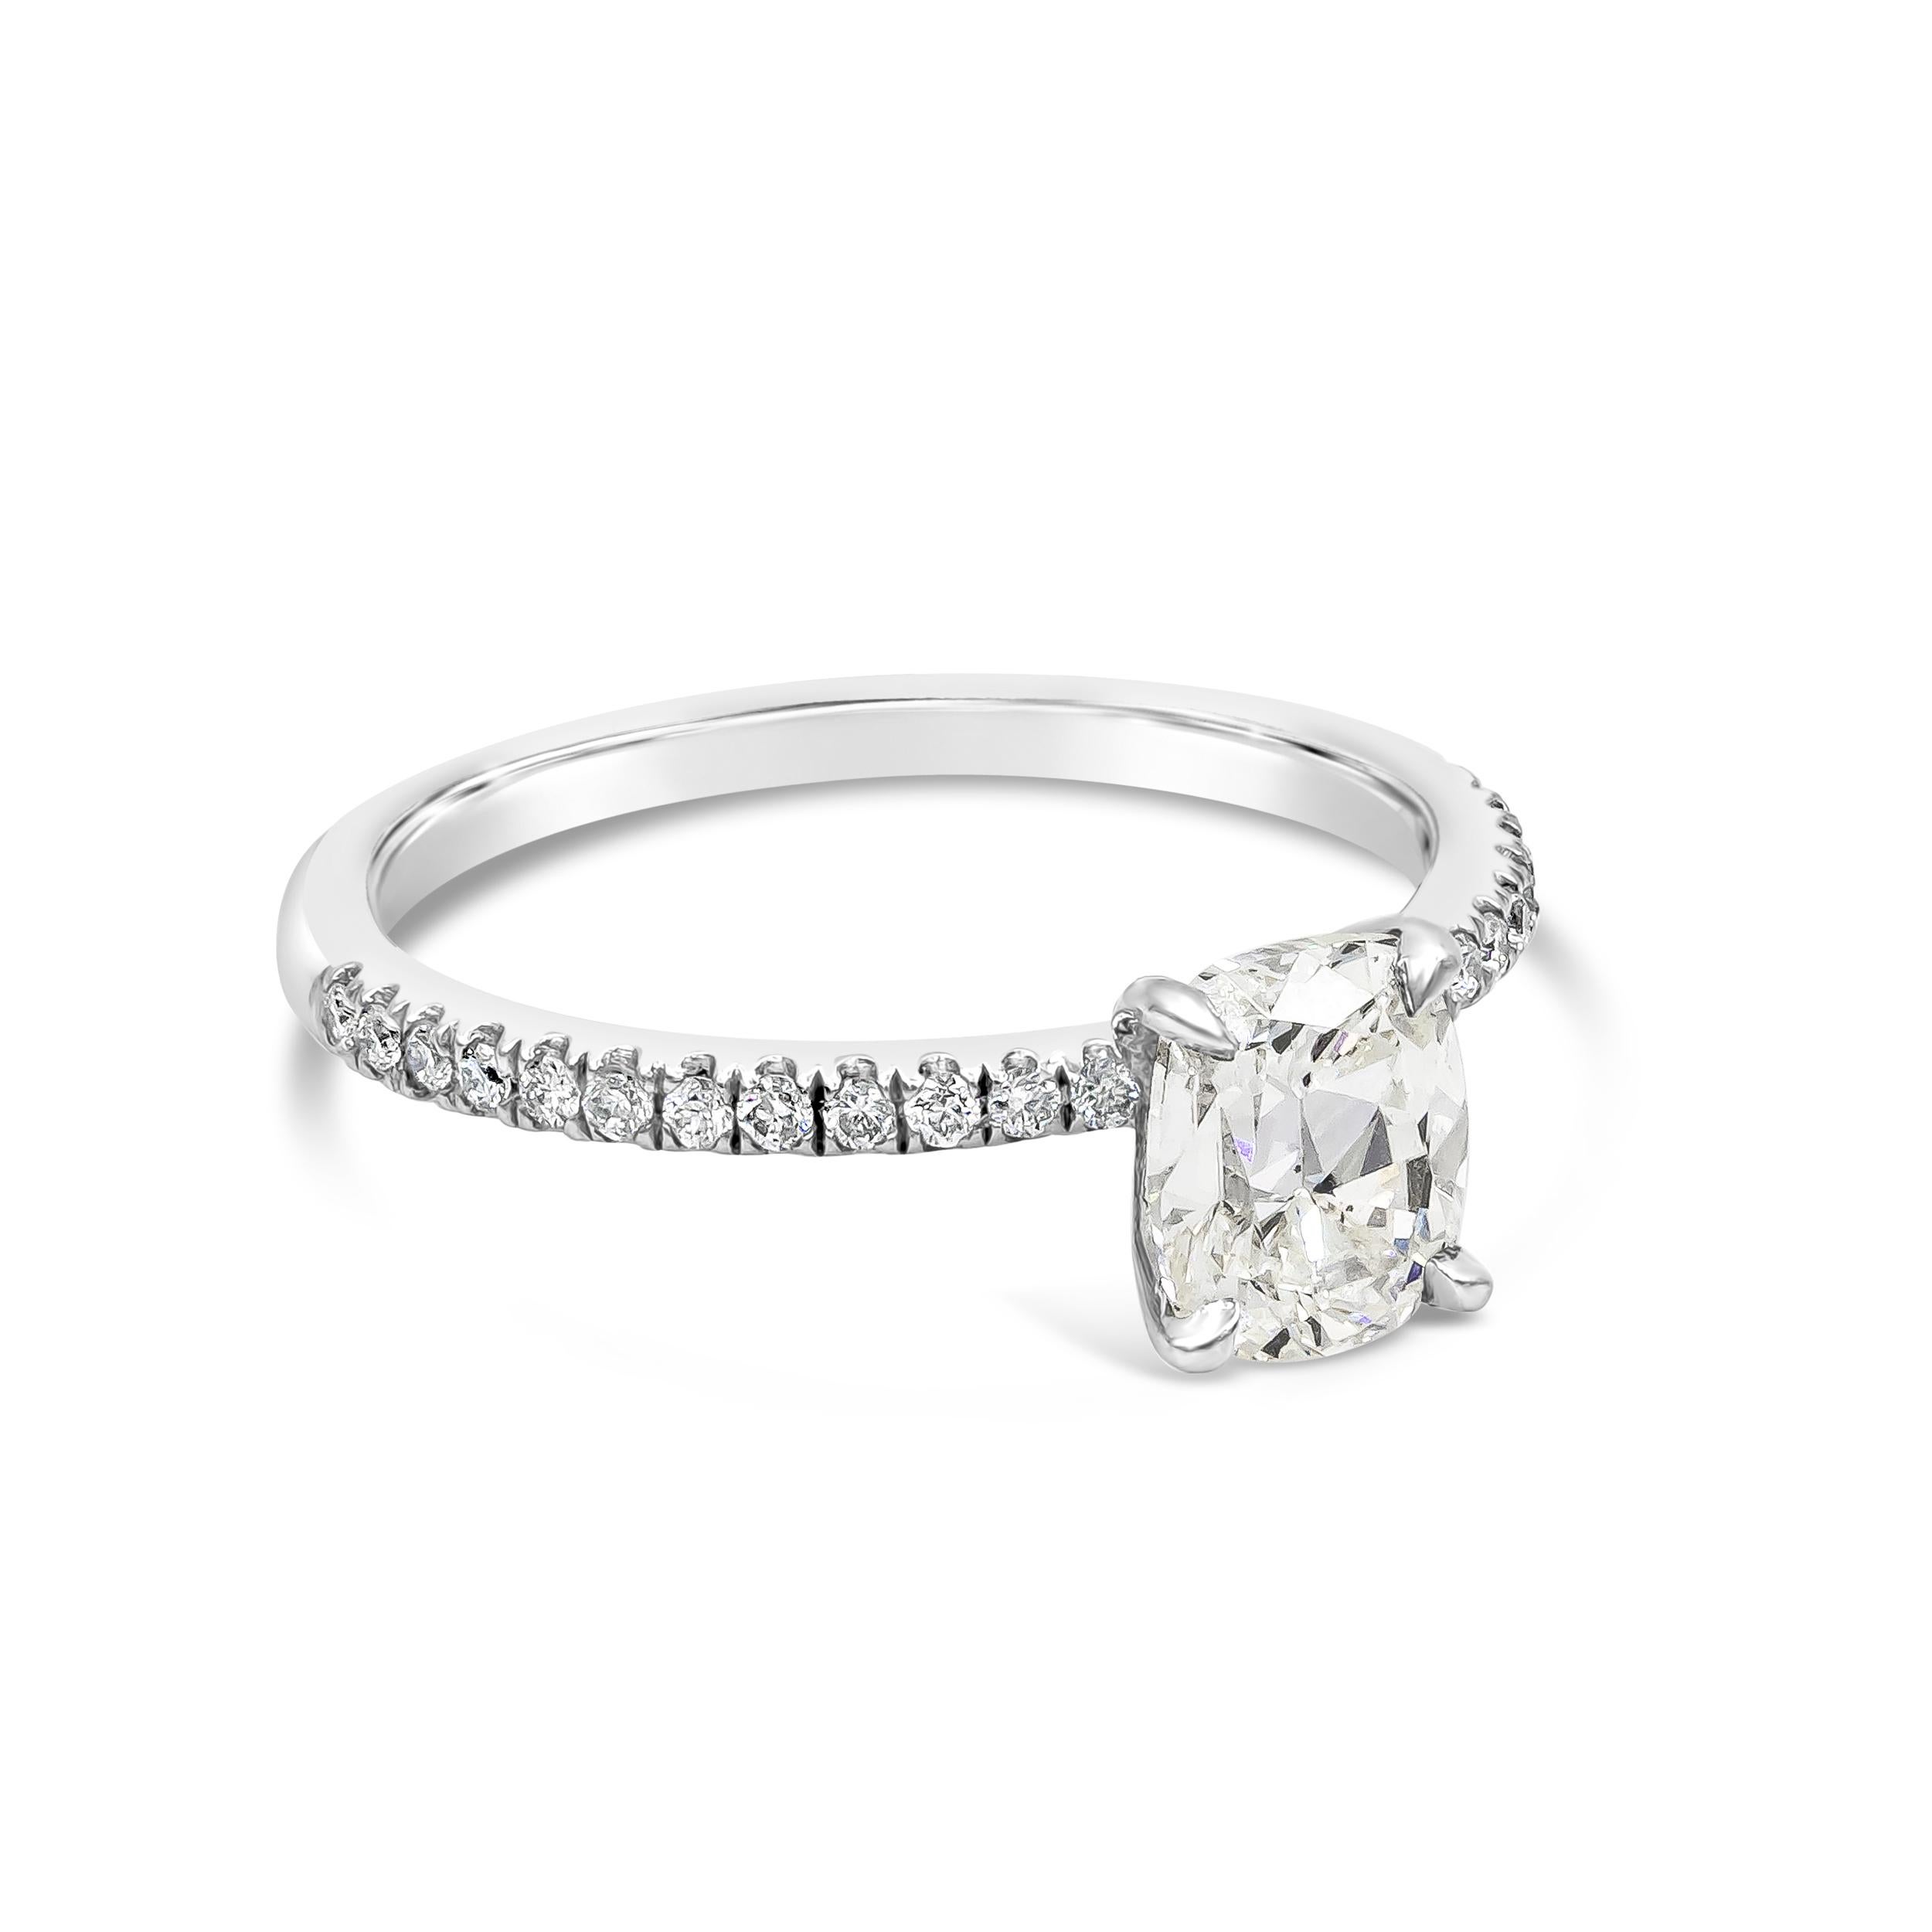 A classic engagement ring style showcasing a 1.10 carats cushion cut diamond certified by EGL as J color, SI1 in clarity, set in a timeless four prong basket setting. Center diamond set in a platinum band accented with round diamonds weighing 0.16